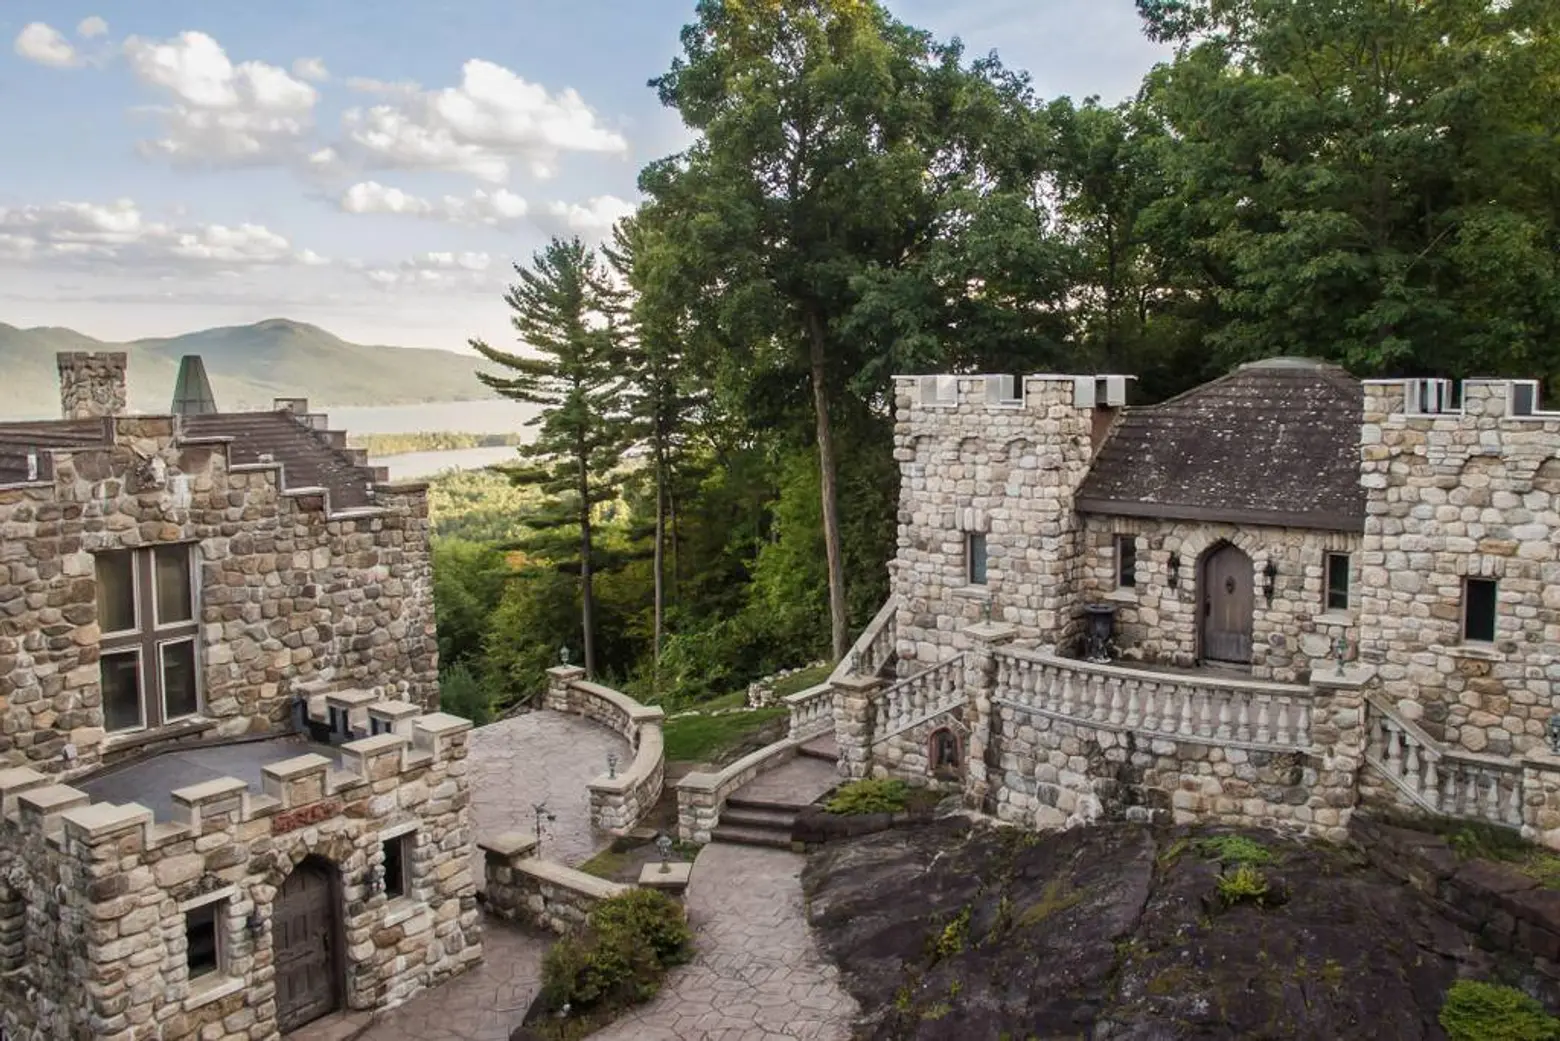 Escape to this extraordinary mini-castle overlooking Lake George for $395/night